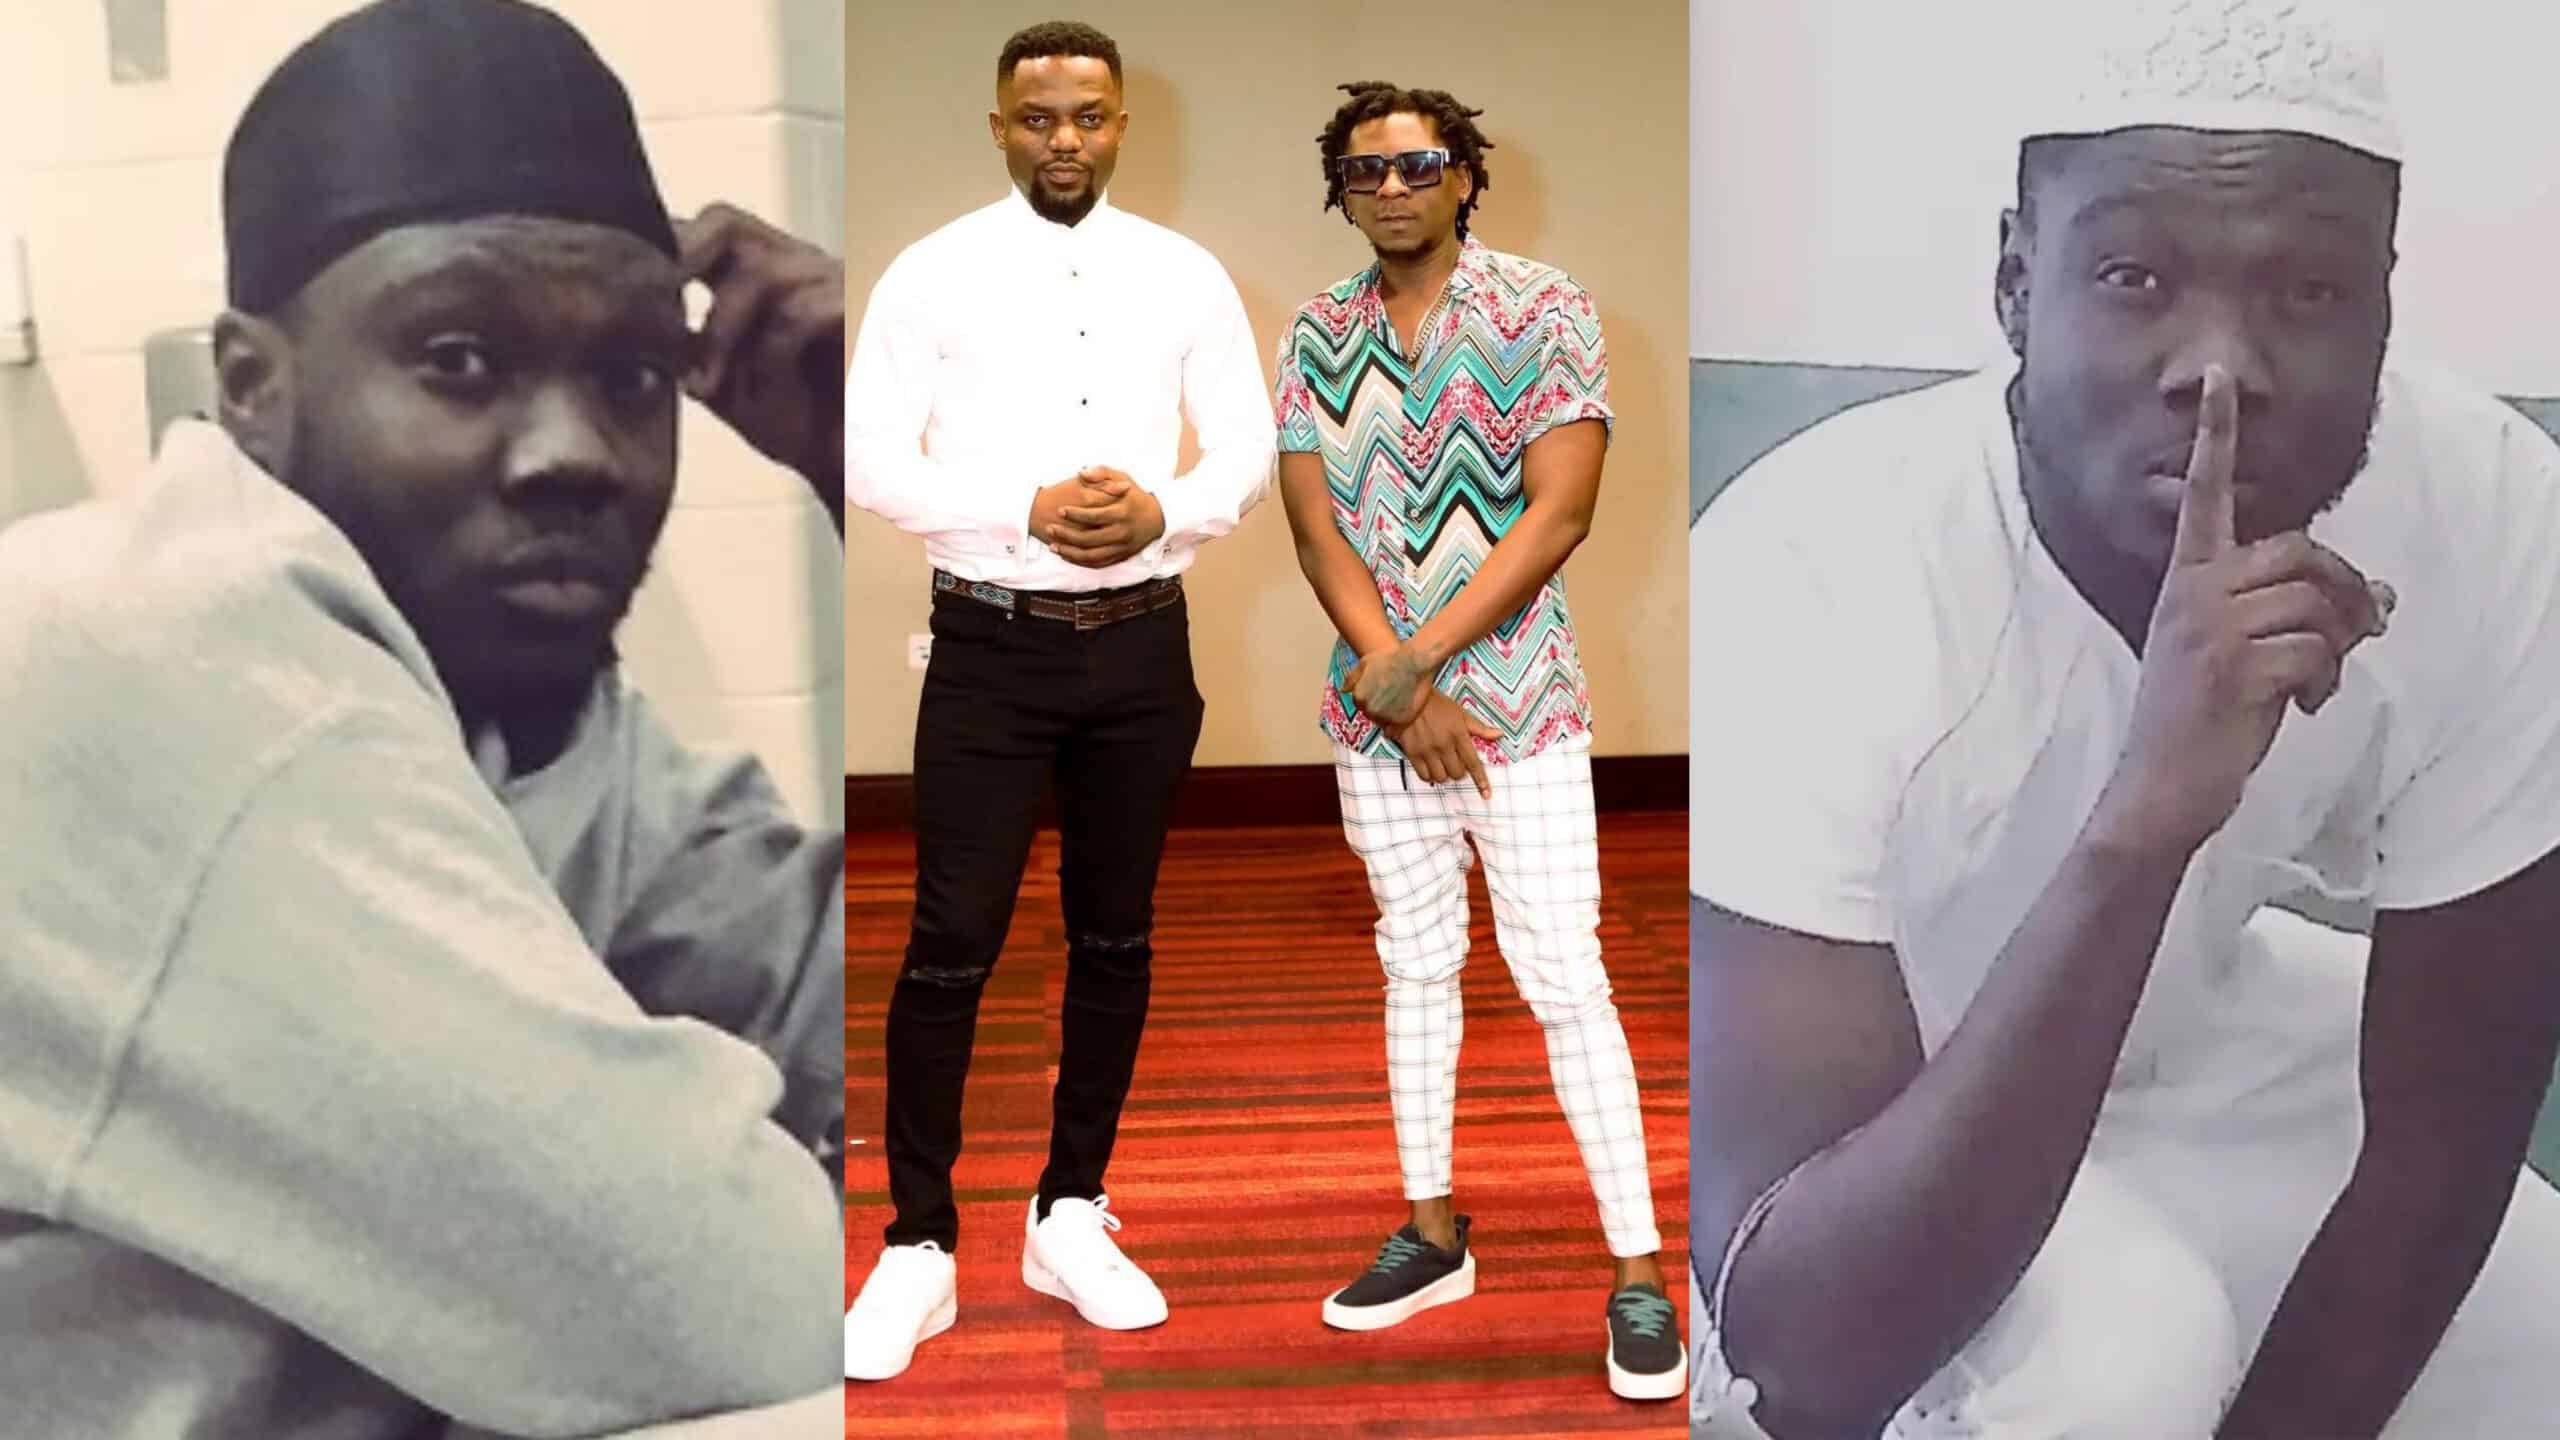 "They are good-for-nothing old men" - Showboy tears into R2Bees